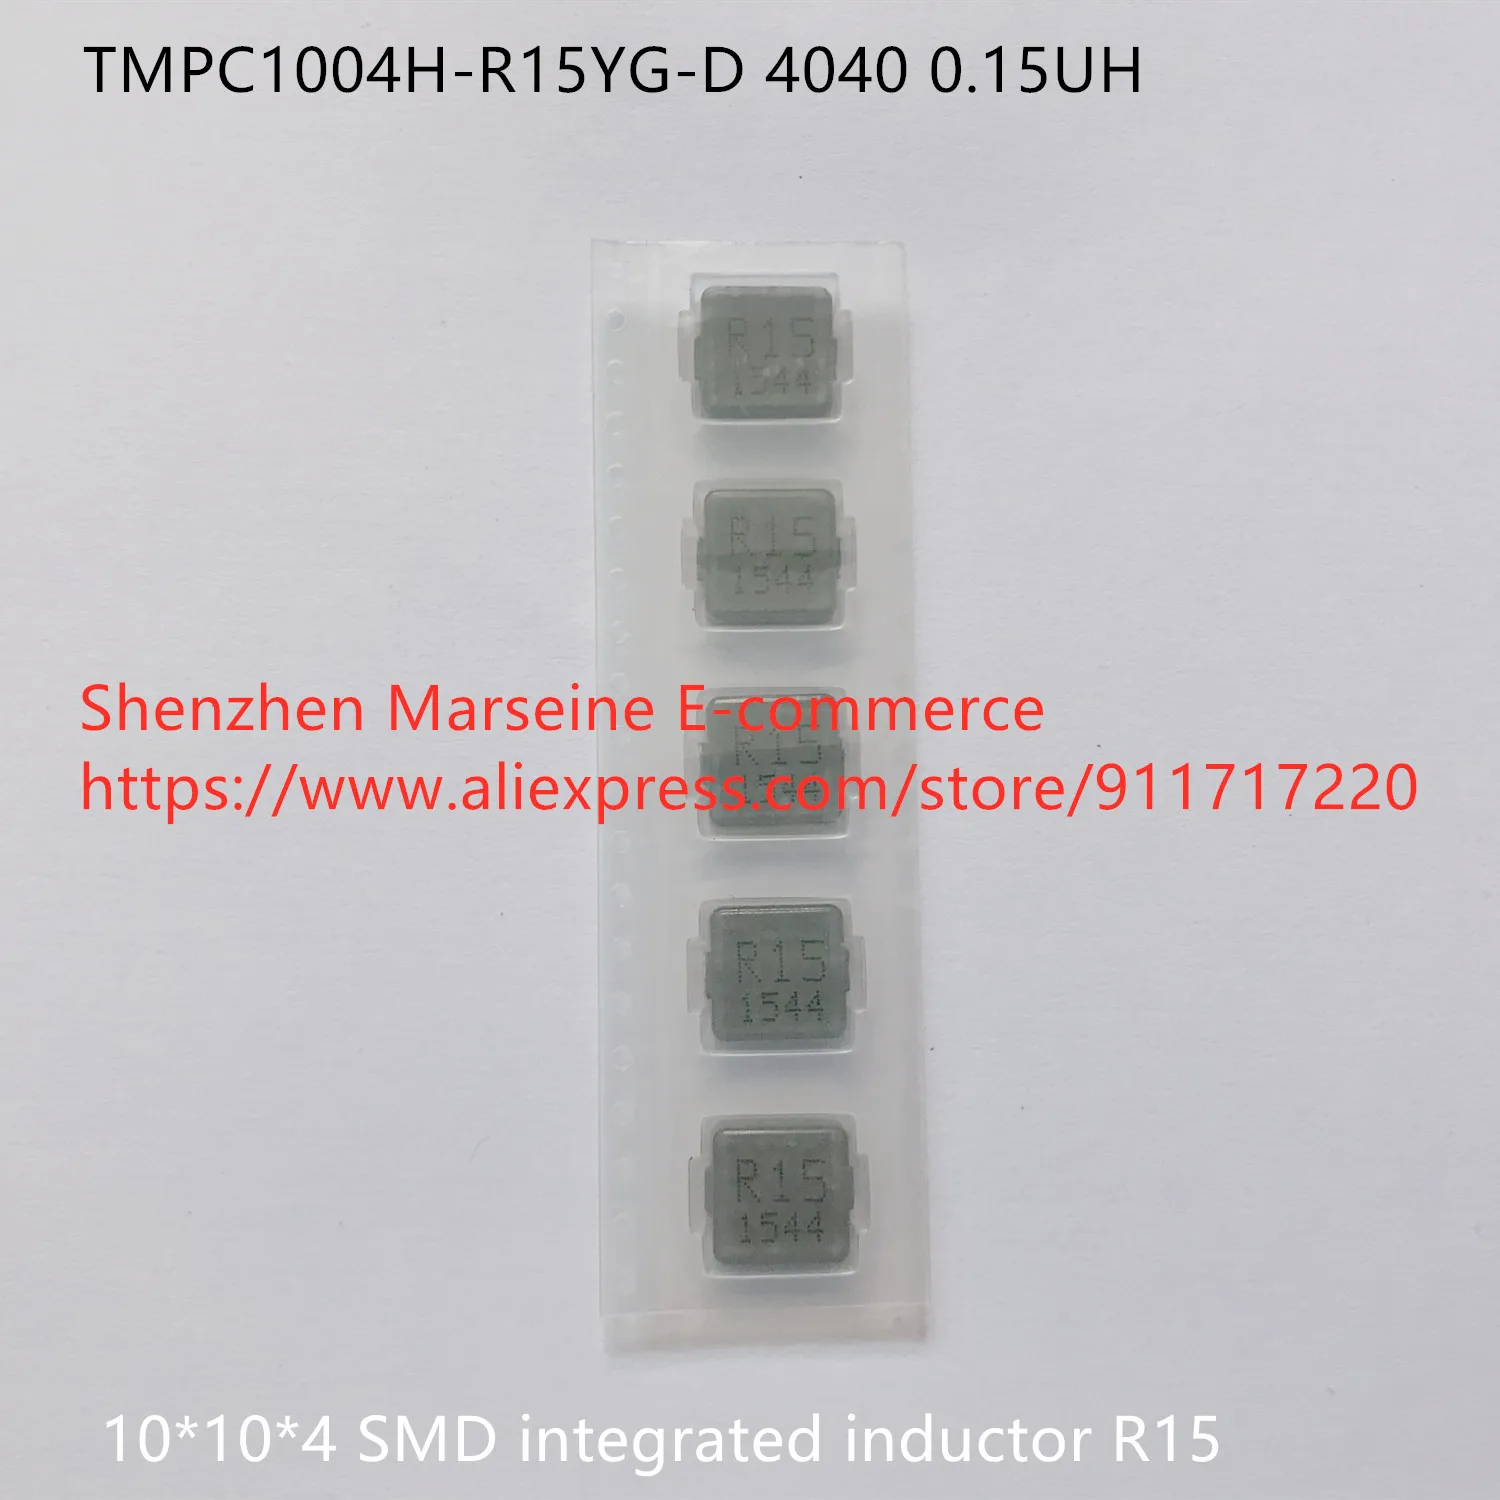 

Original New 100% TMPC1004H-R15YG-D 4040 0.15UH 10*10*4 SMD integrated inductor R15